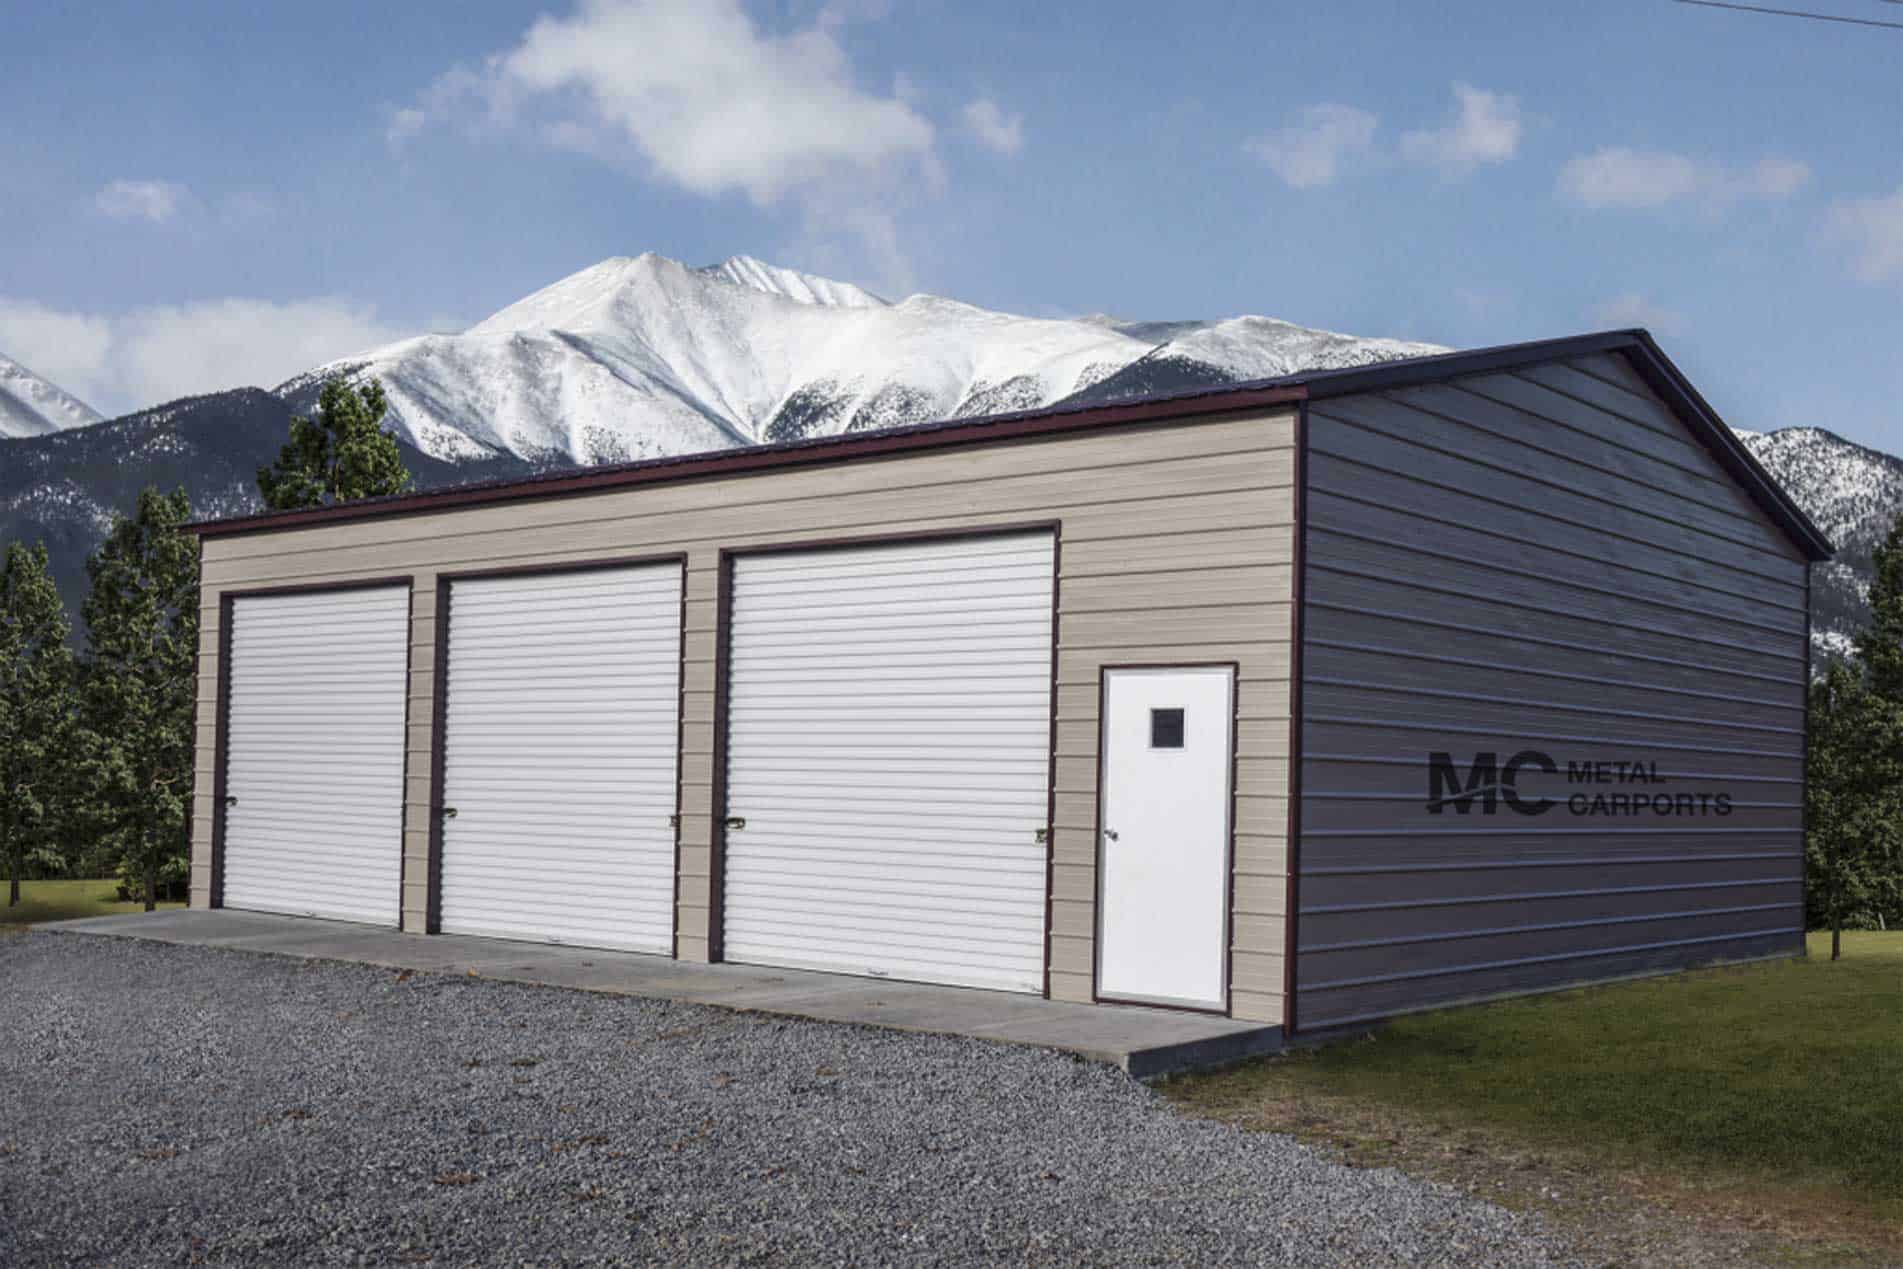 Metal Garage Buildings available for sale